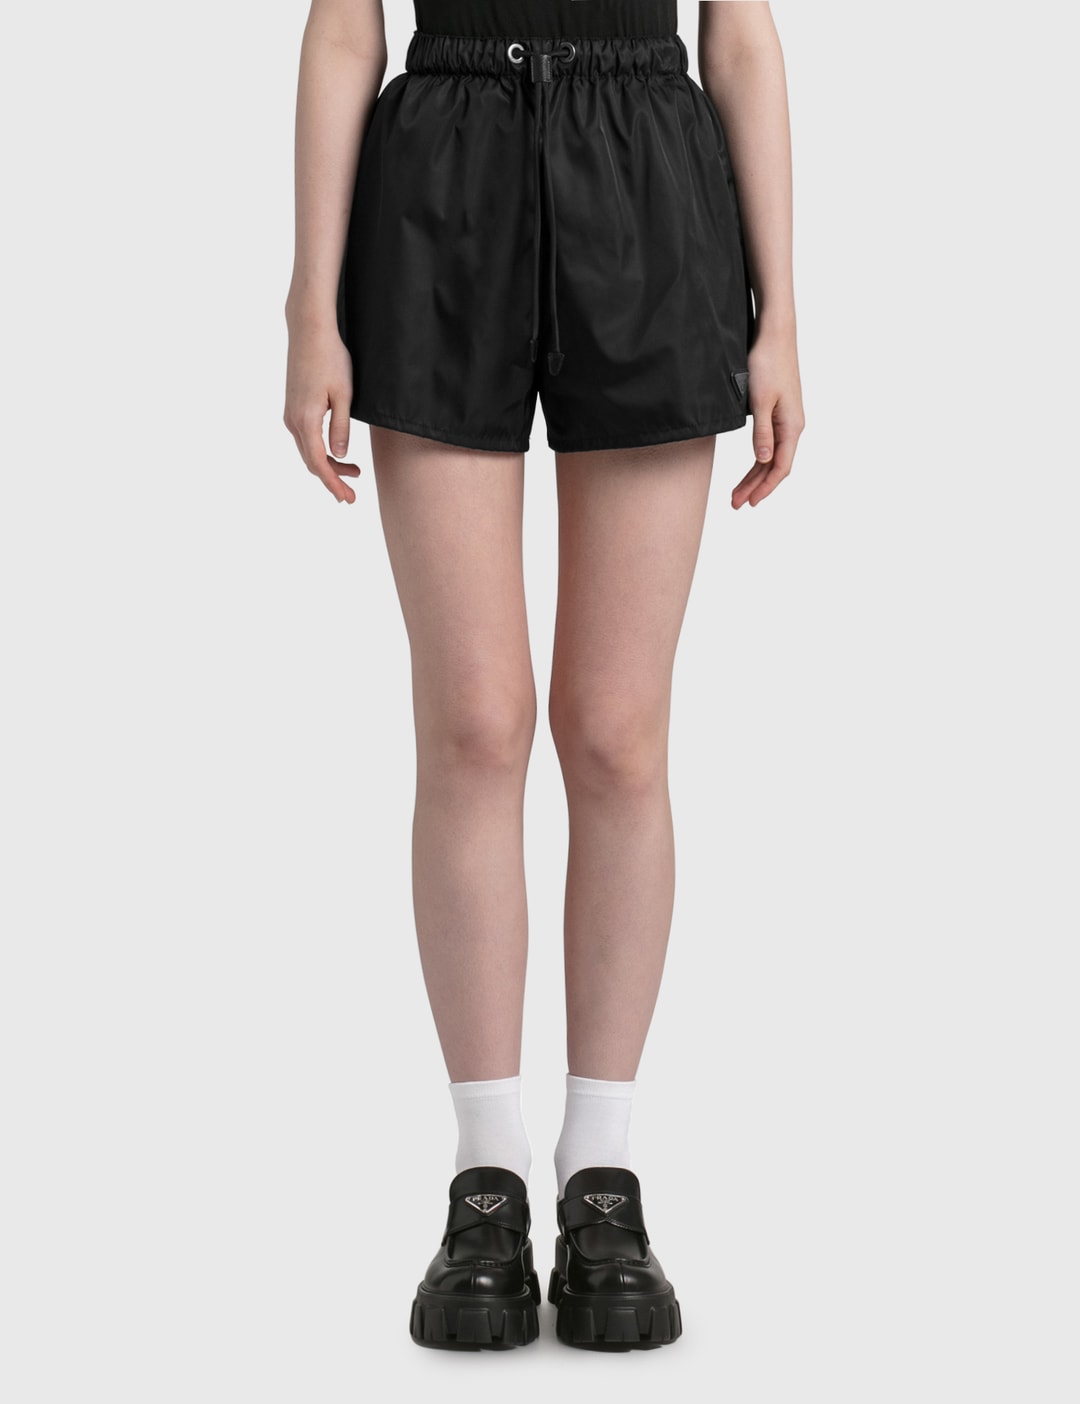 Prada - Re-nylon Shorts | HBX - Globally Curated Fashion and Lifestyle by  Hypebeast